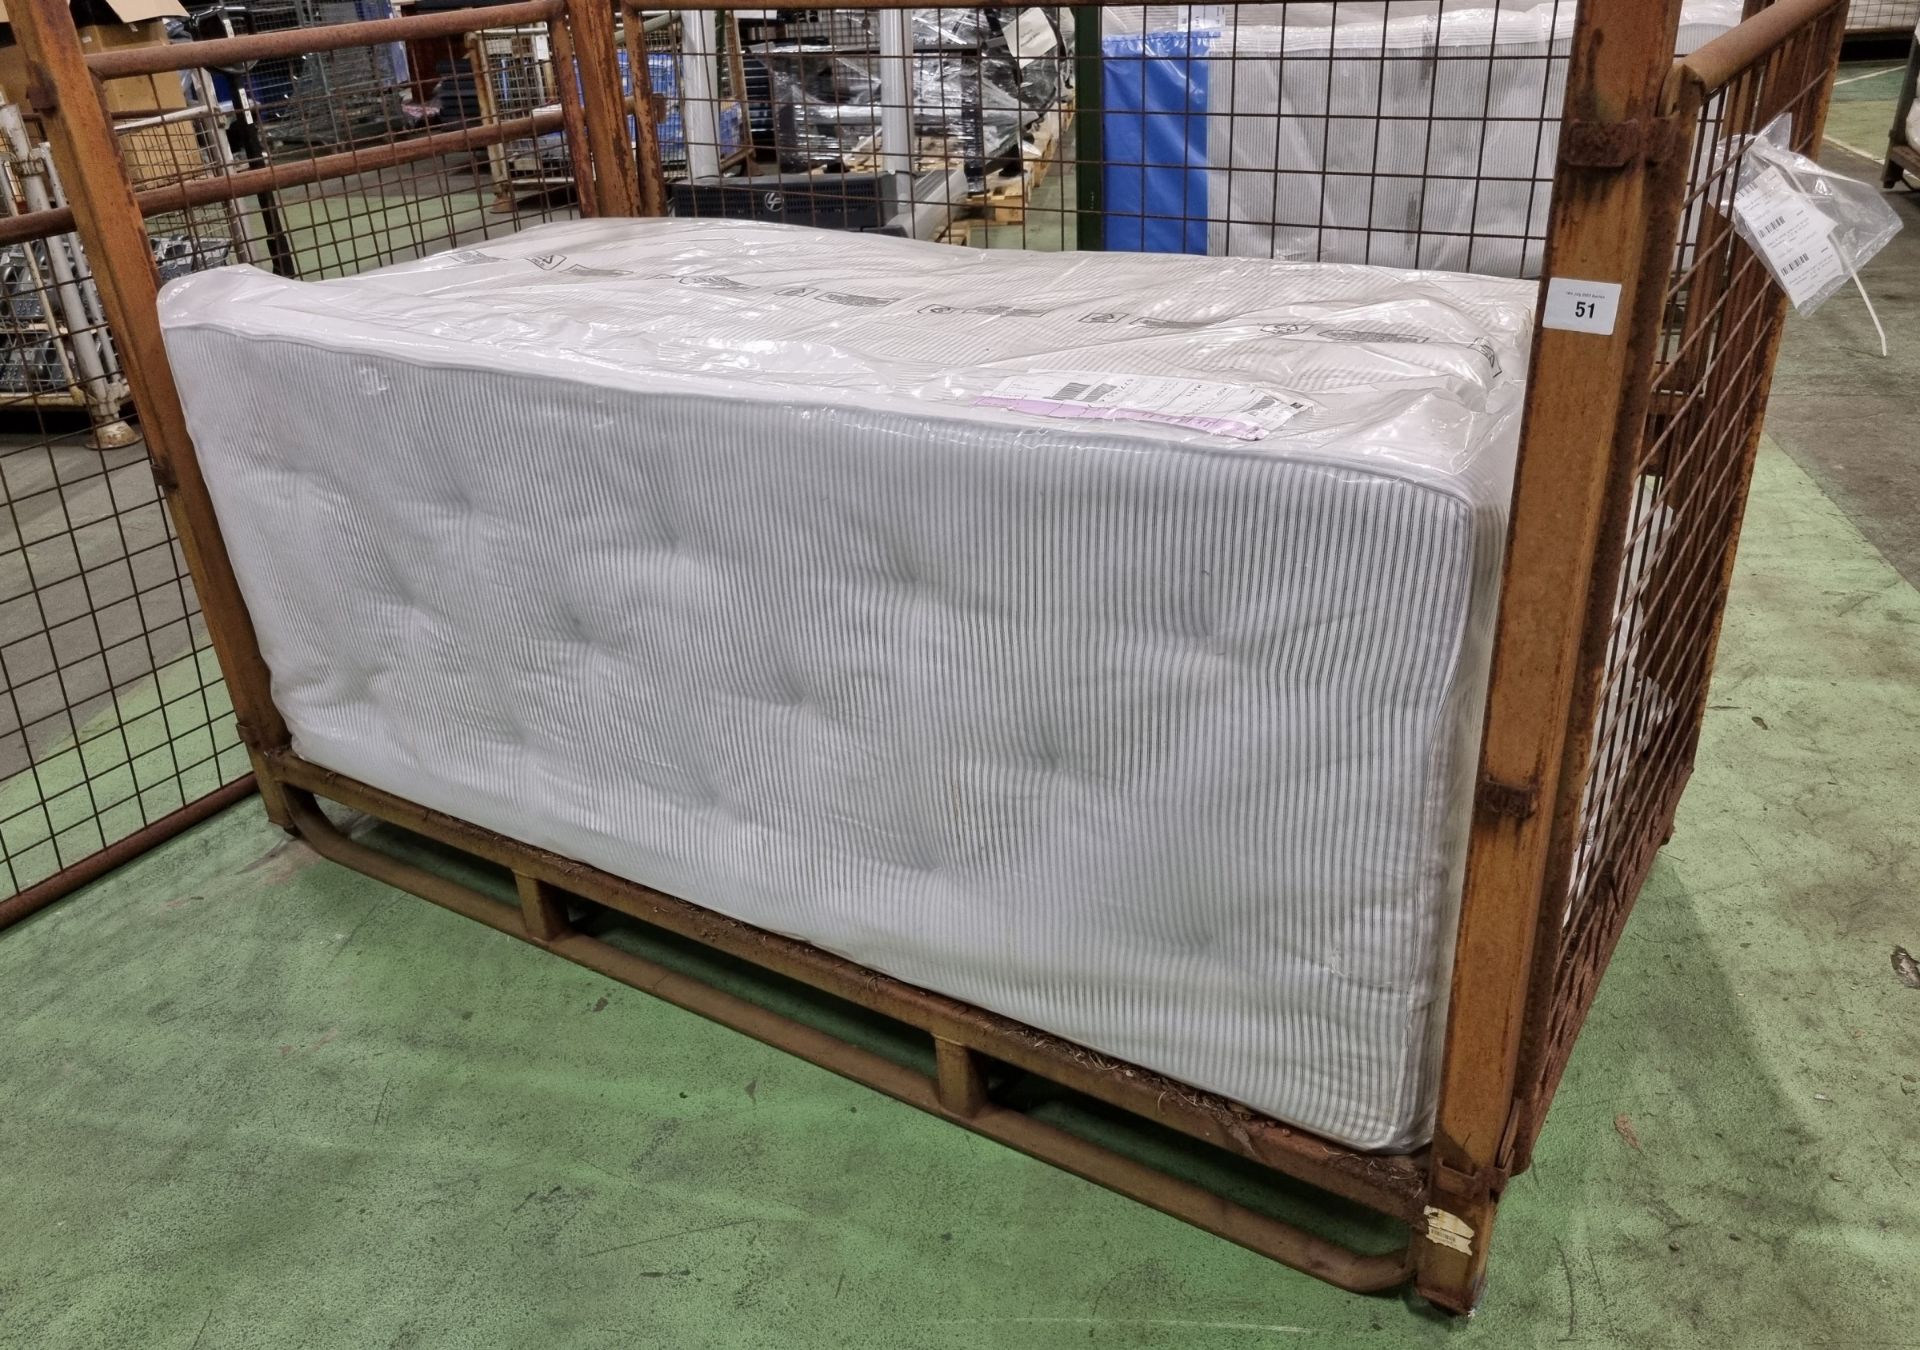 5x Black & white open coil single mattresses - discoloured due to being in storage - Image 2 of 4